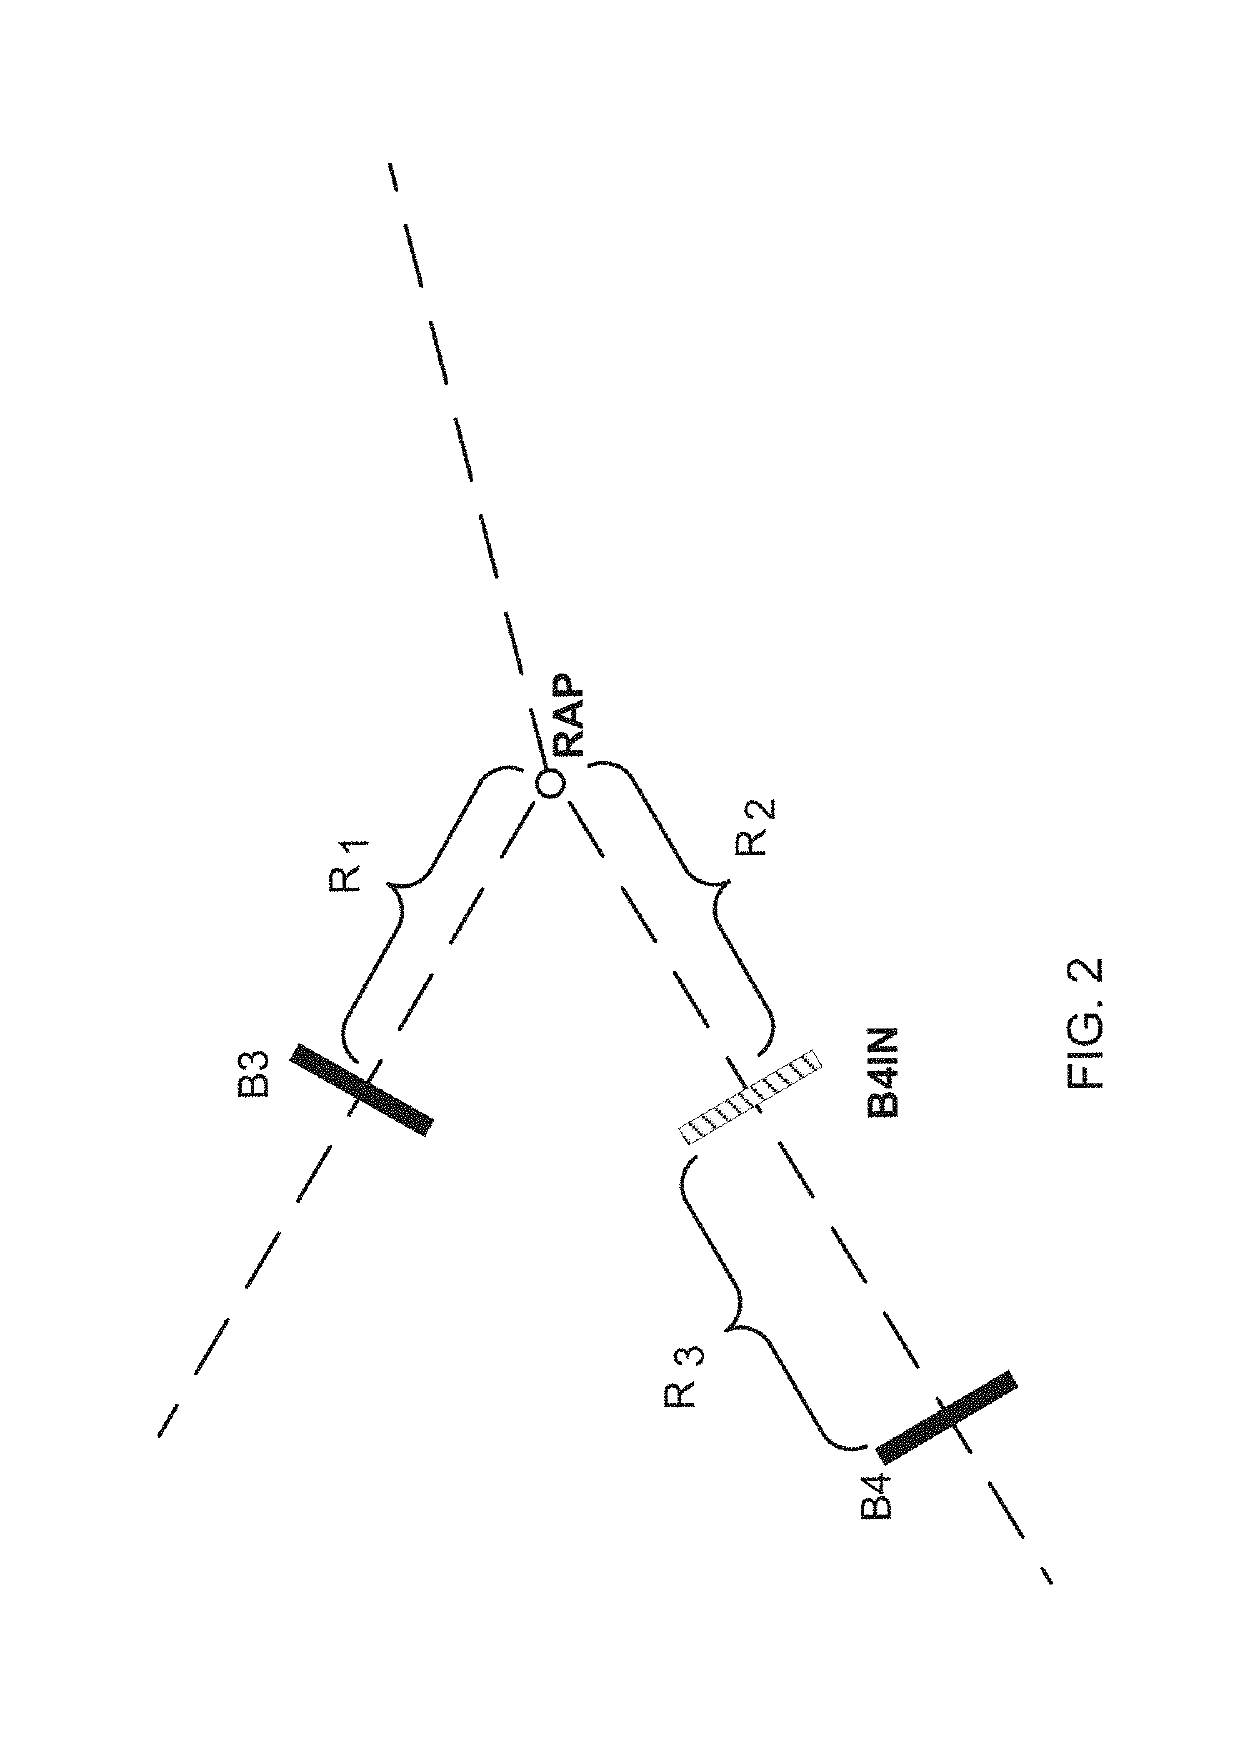 Miles-in-trail with passback restrictions for use in air traffic management